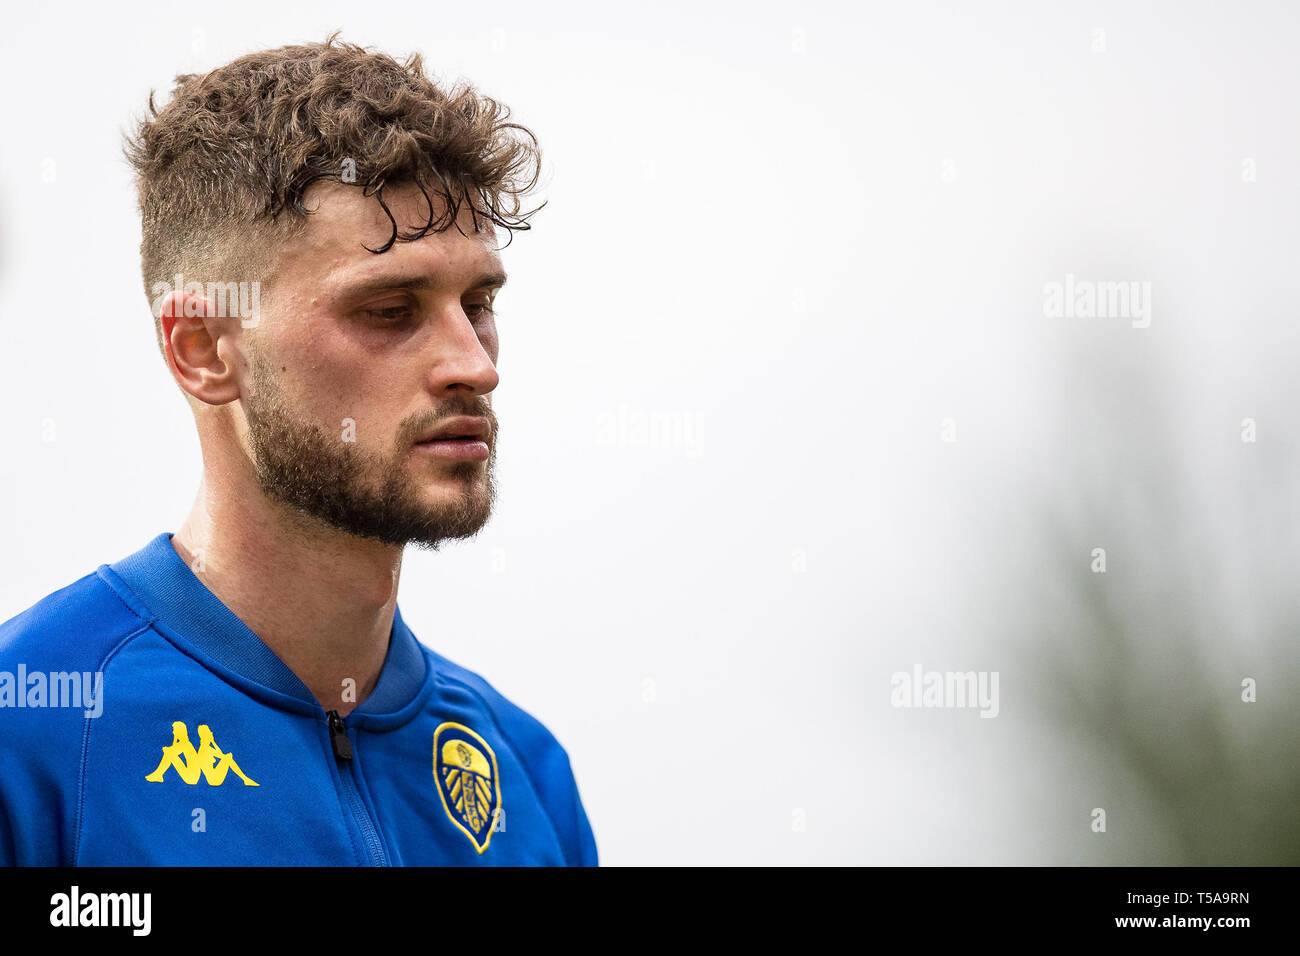 BRENTFORD, ENGLAND - APRIL 22: Mateusz Klich of Leeds United looks on during the Sky Bet Championship match between Brentford and Leeds United at Griffin Park on April 22, 2019 in Brentford, England. (Photo by Sebastian Frej/MB Media) Stock Photo